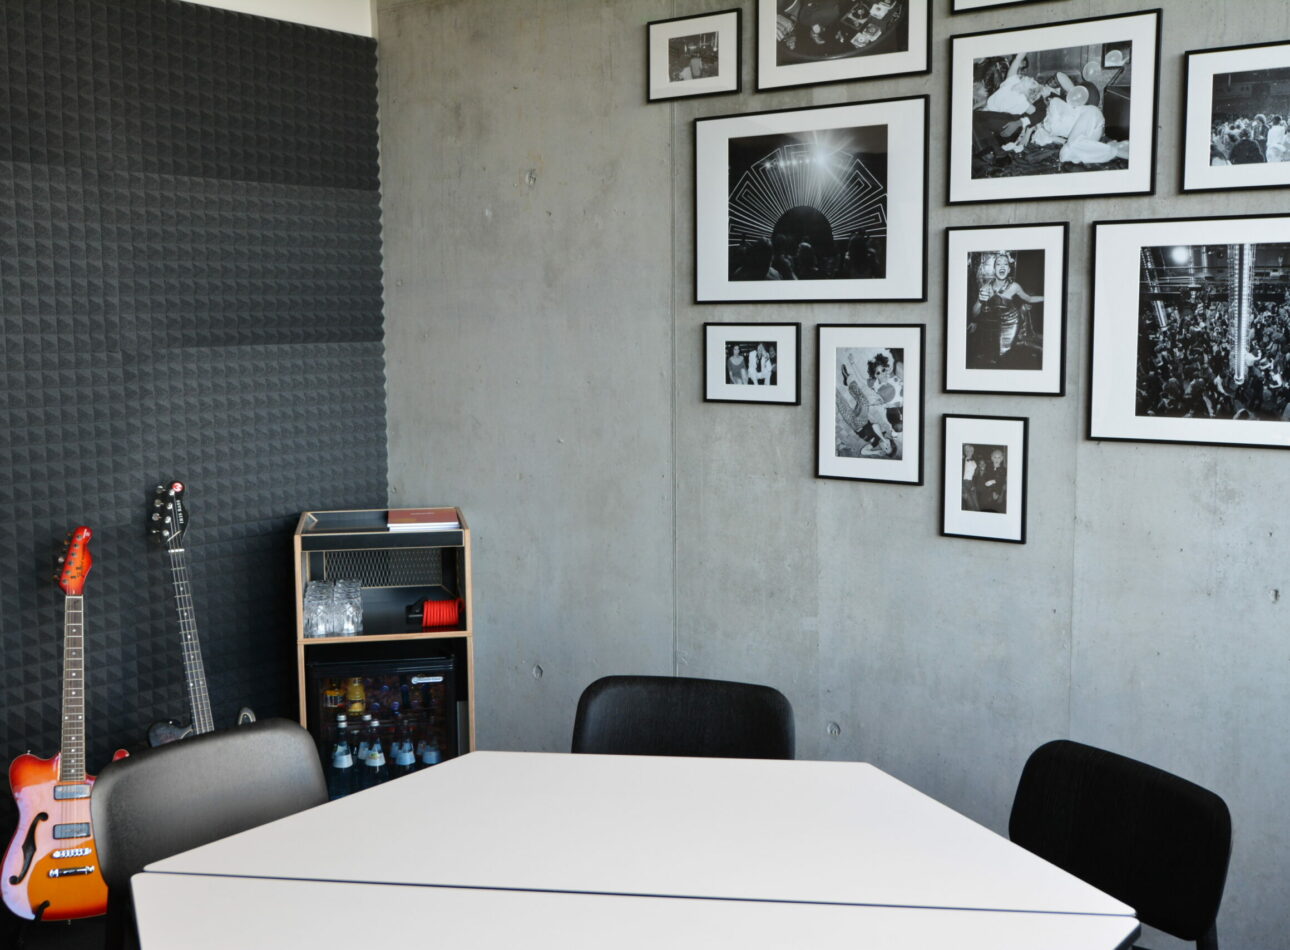 meeting room in Mannheim with images on the wall and two guitars standing in the room